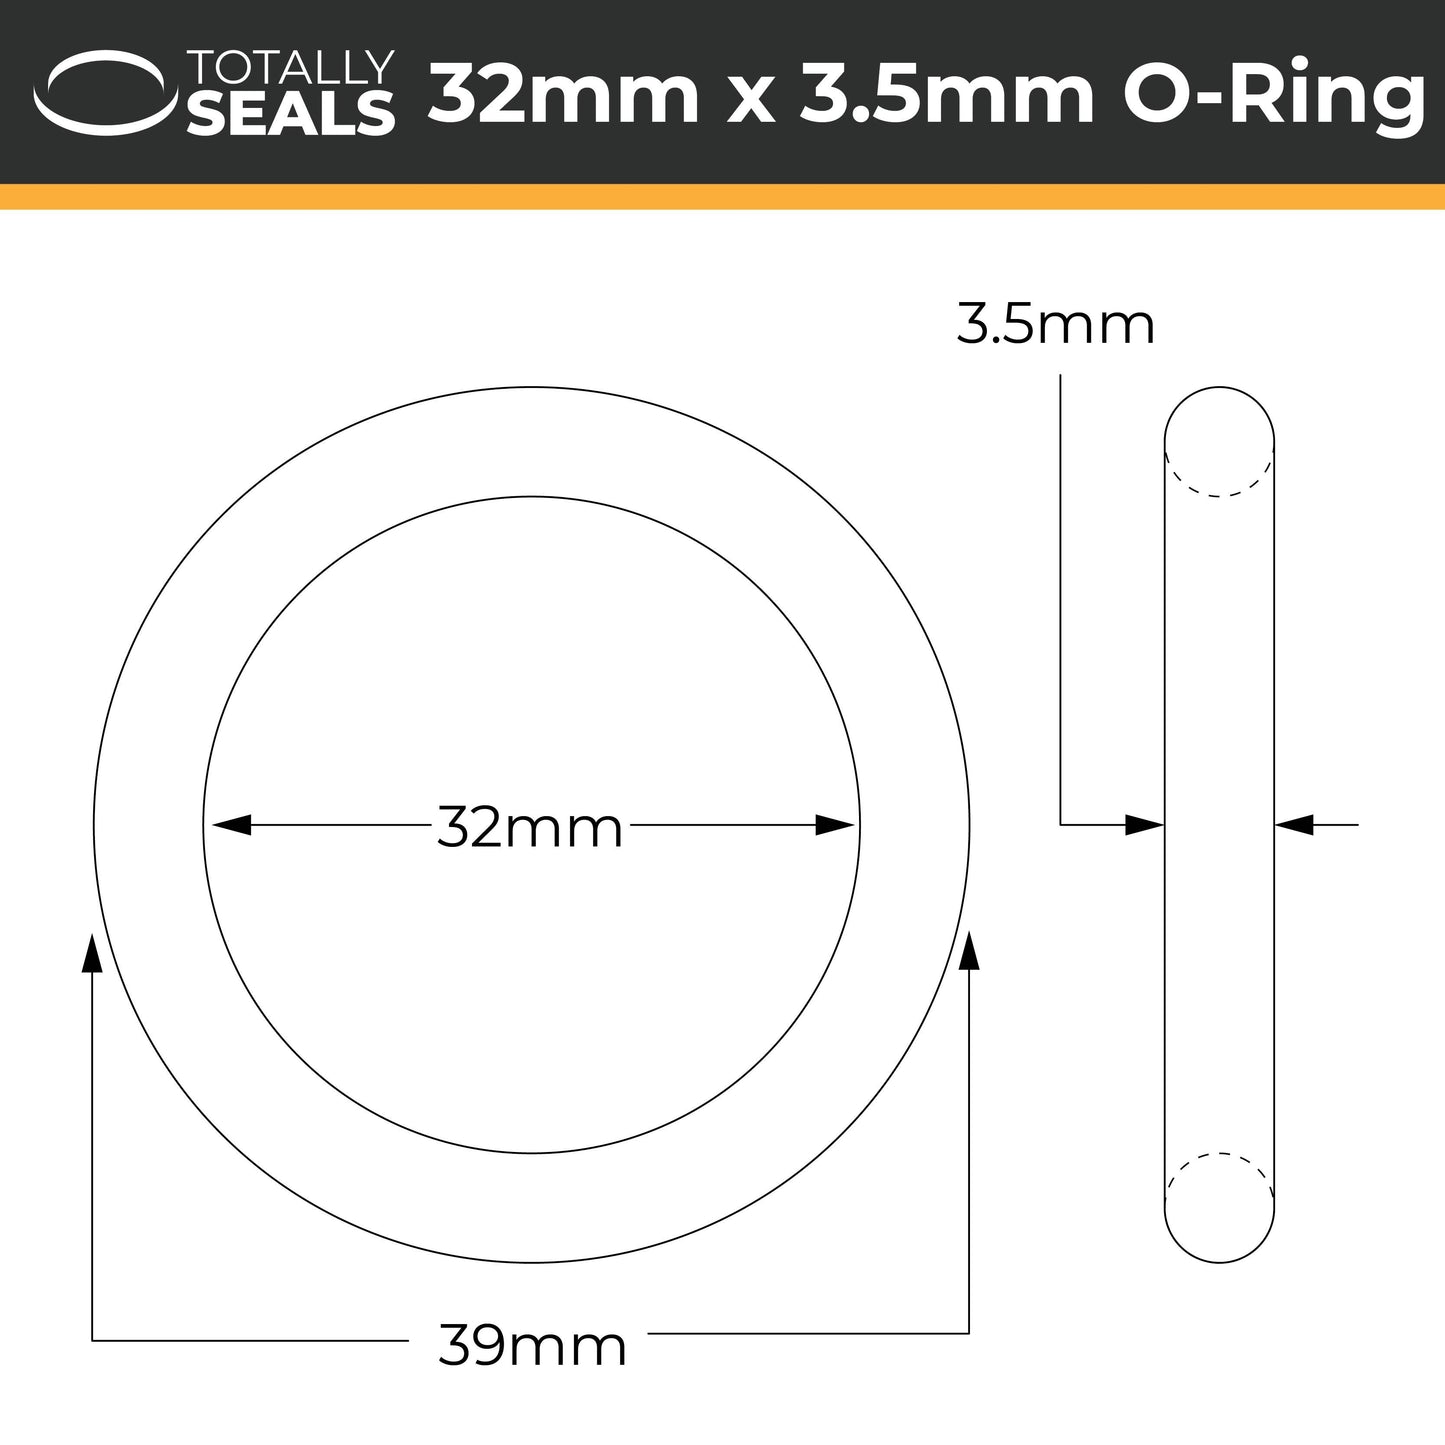 32mm x 3.5mm (39mm OD) Nitrile O-Rings - Totally Seals®